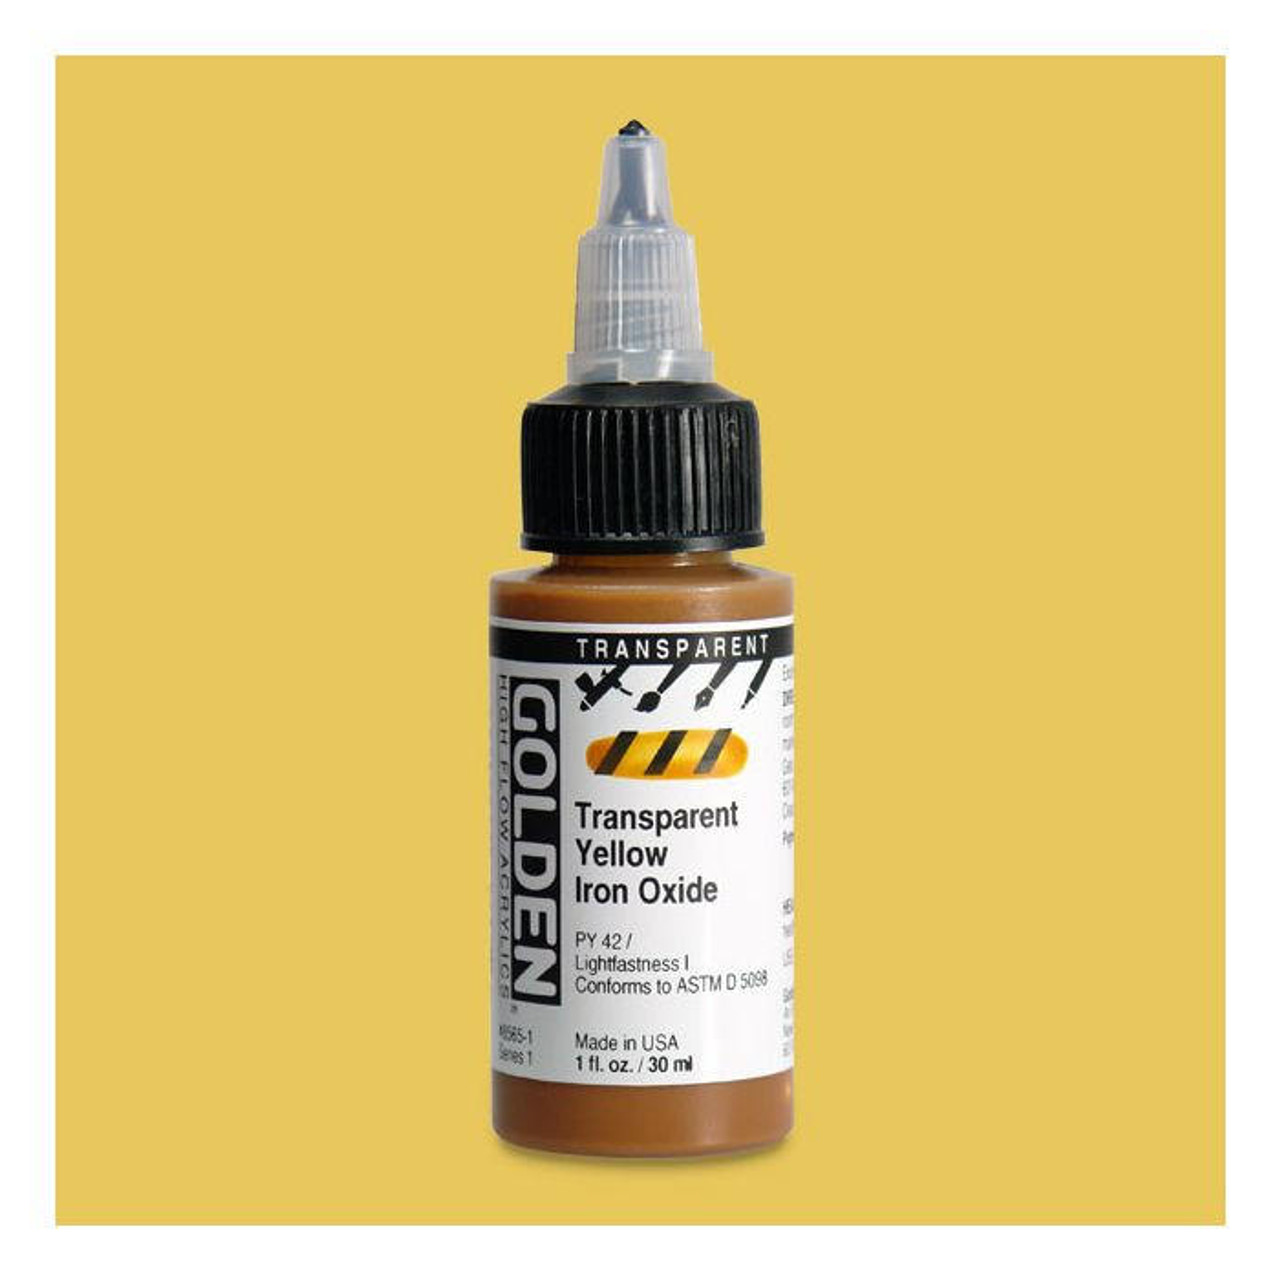 High Flow is acrylic paint that can go from brush to marker or from dip pen  to airbrush and more. From fine lines to broad strokes, High Flow Acrylic  has